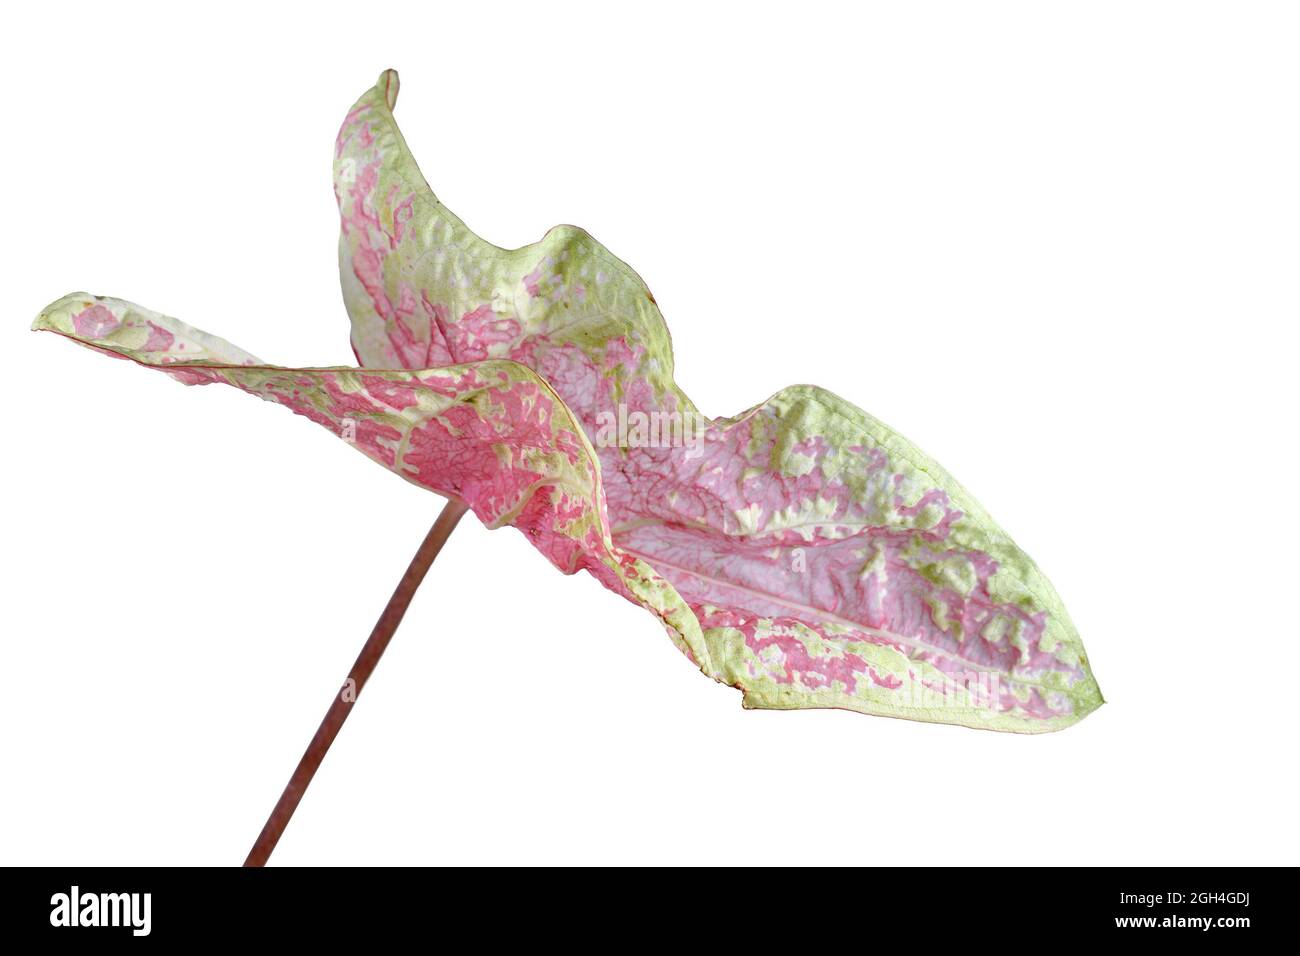 Curios leaf of a pink and yellow translucent exotic 'Caladium Seafoam Pink' houseplant on white background Stock Photo